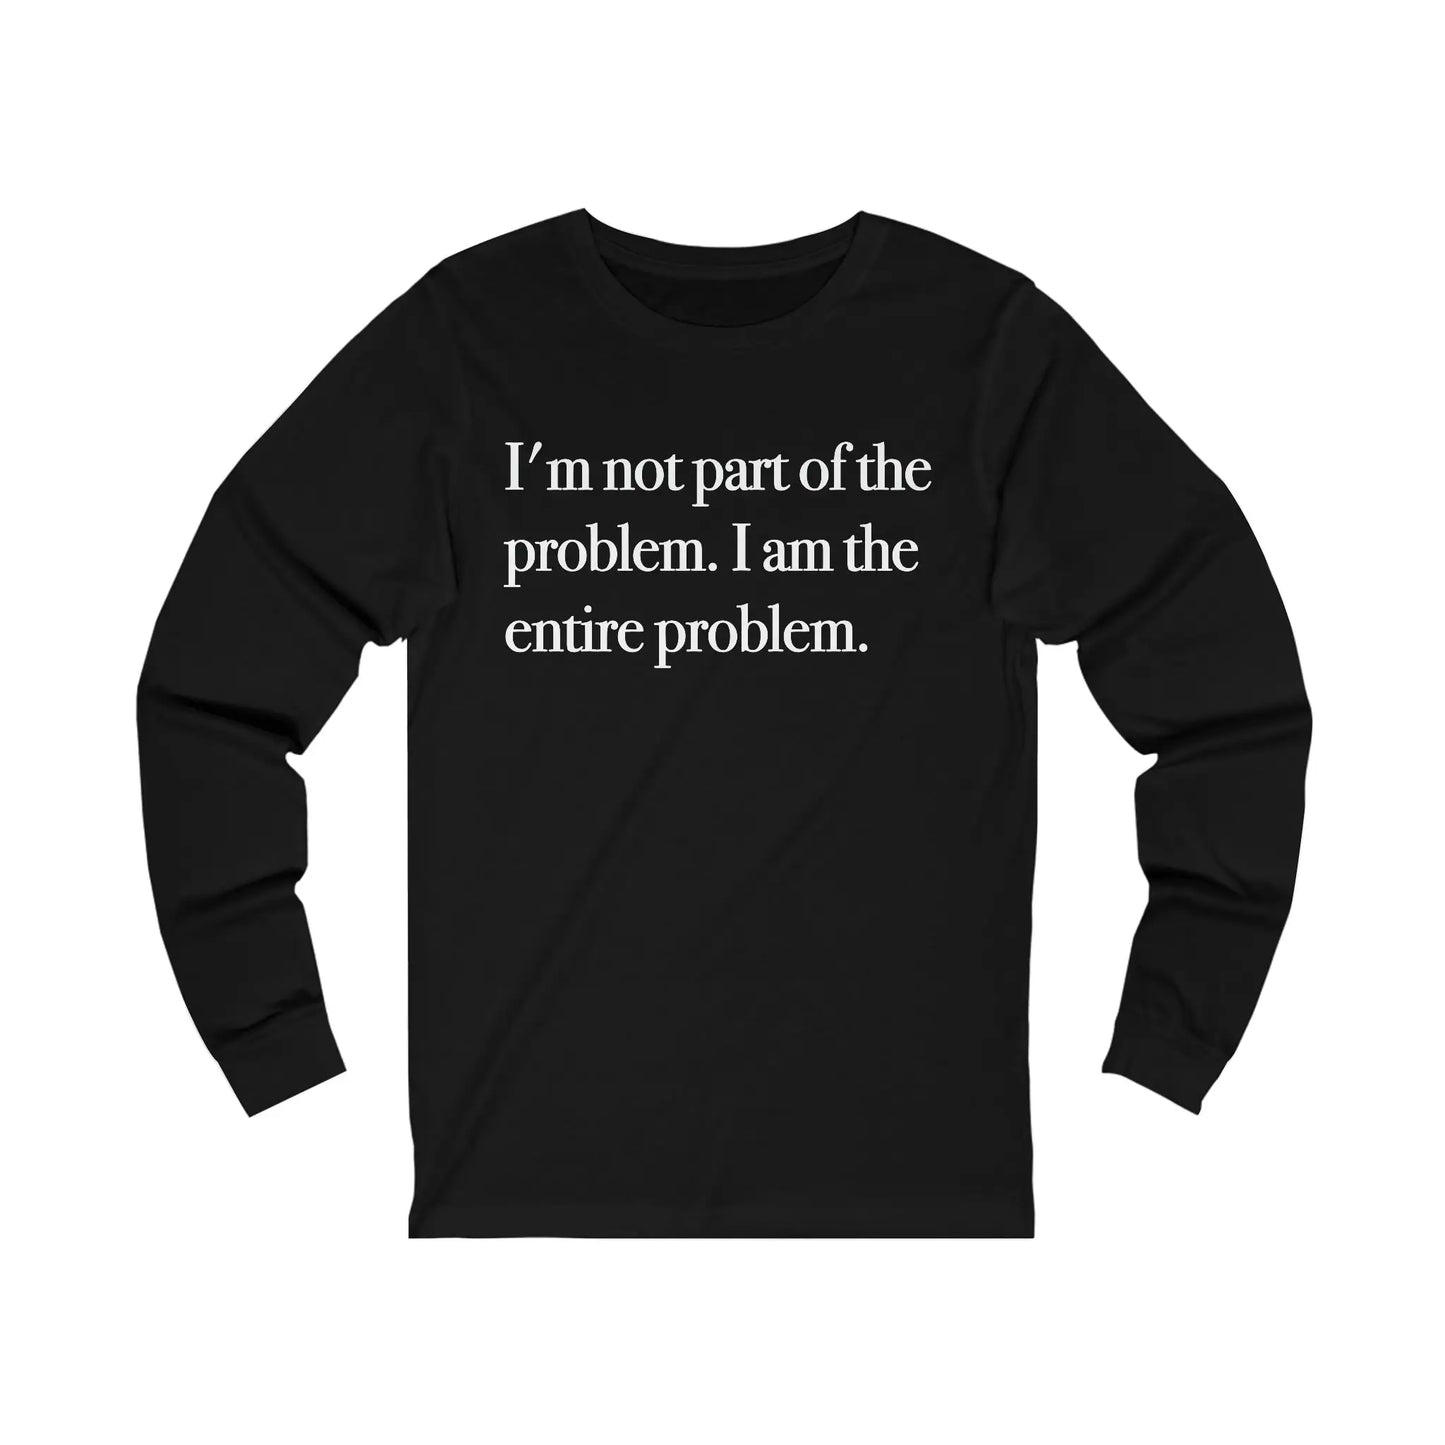 Part Of The Problem Men's Long Sleeve Tee - Wicked Tees